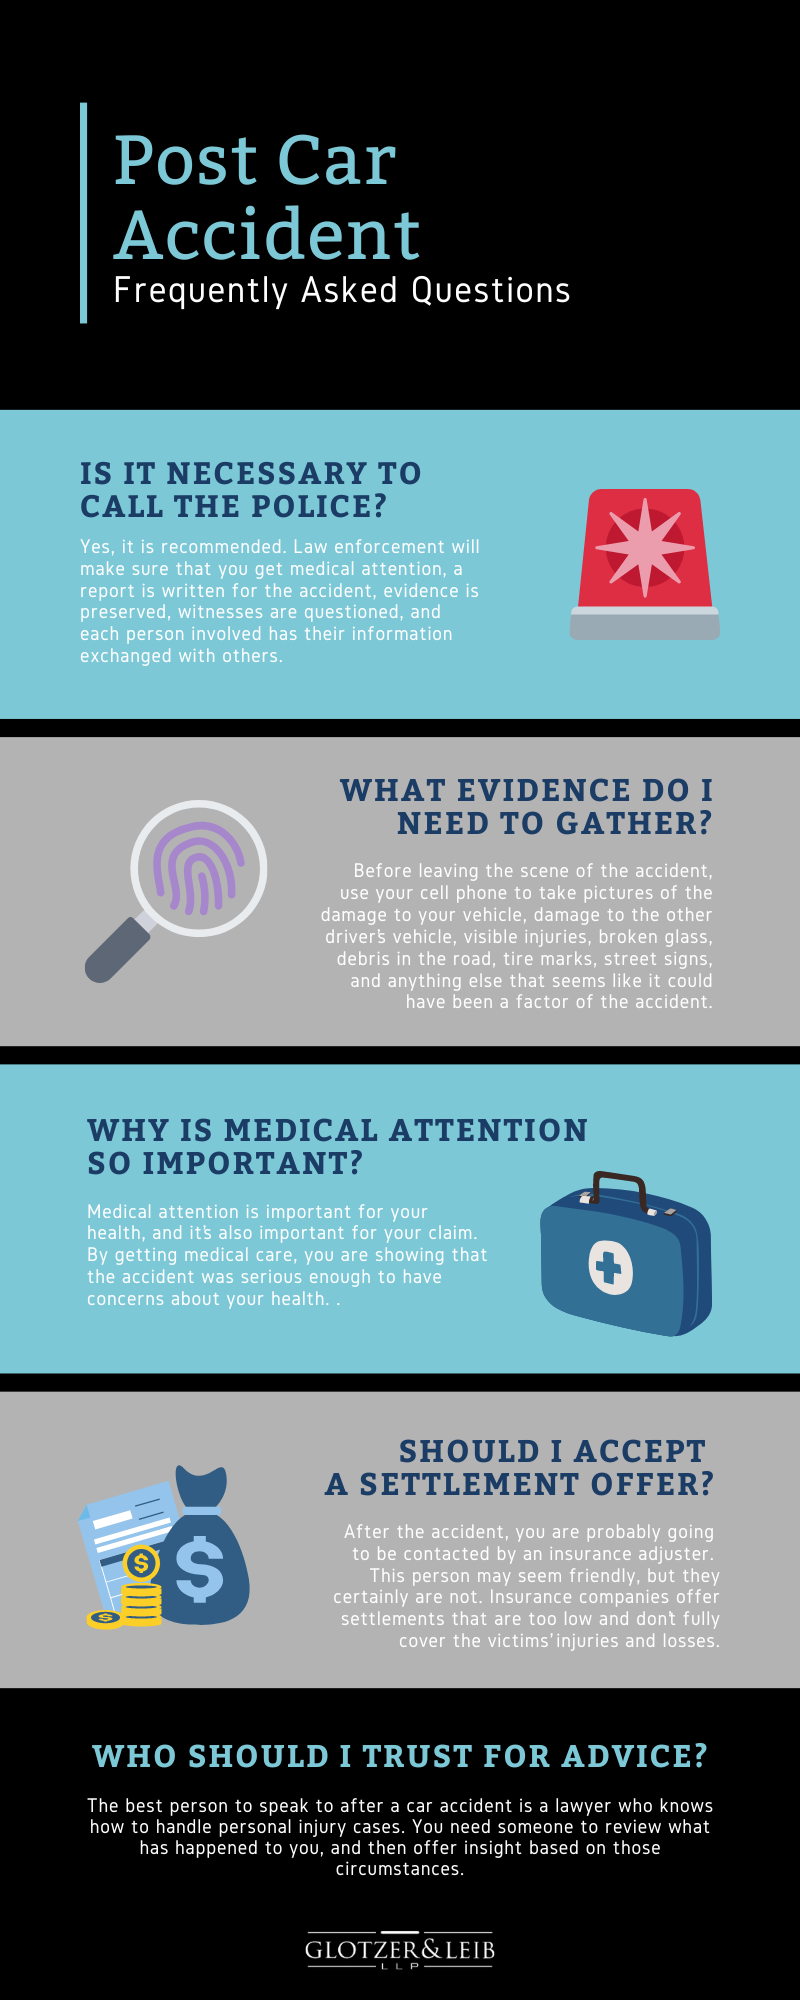 Post Car Accident Frequently Asked Questions Infographic